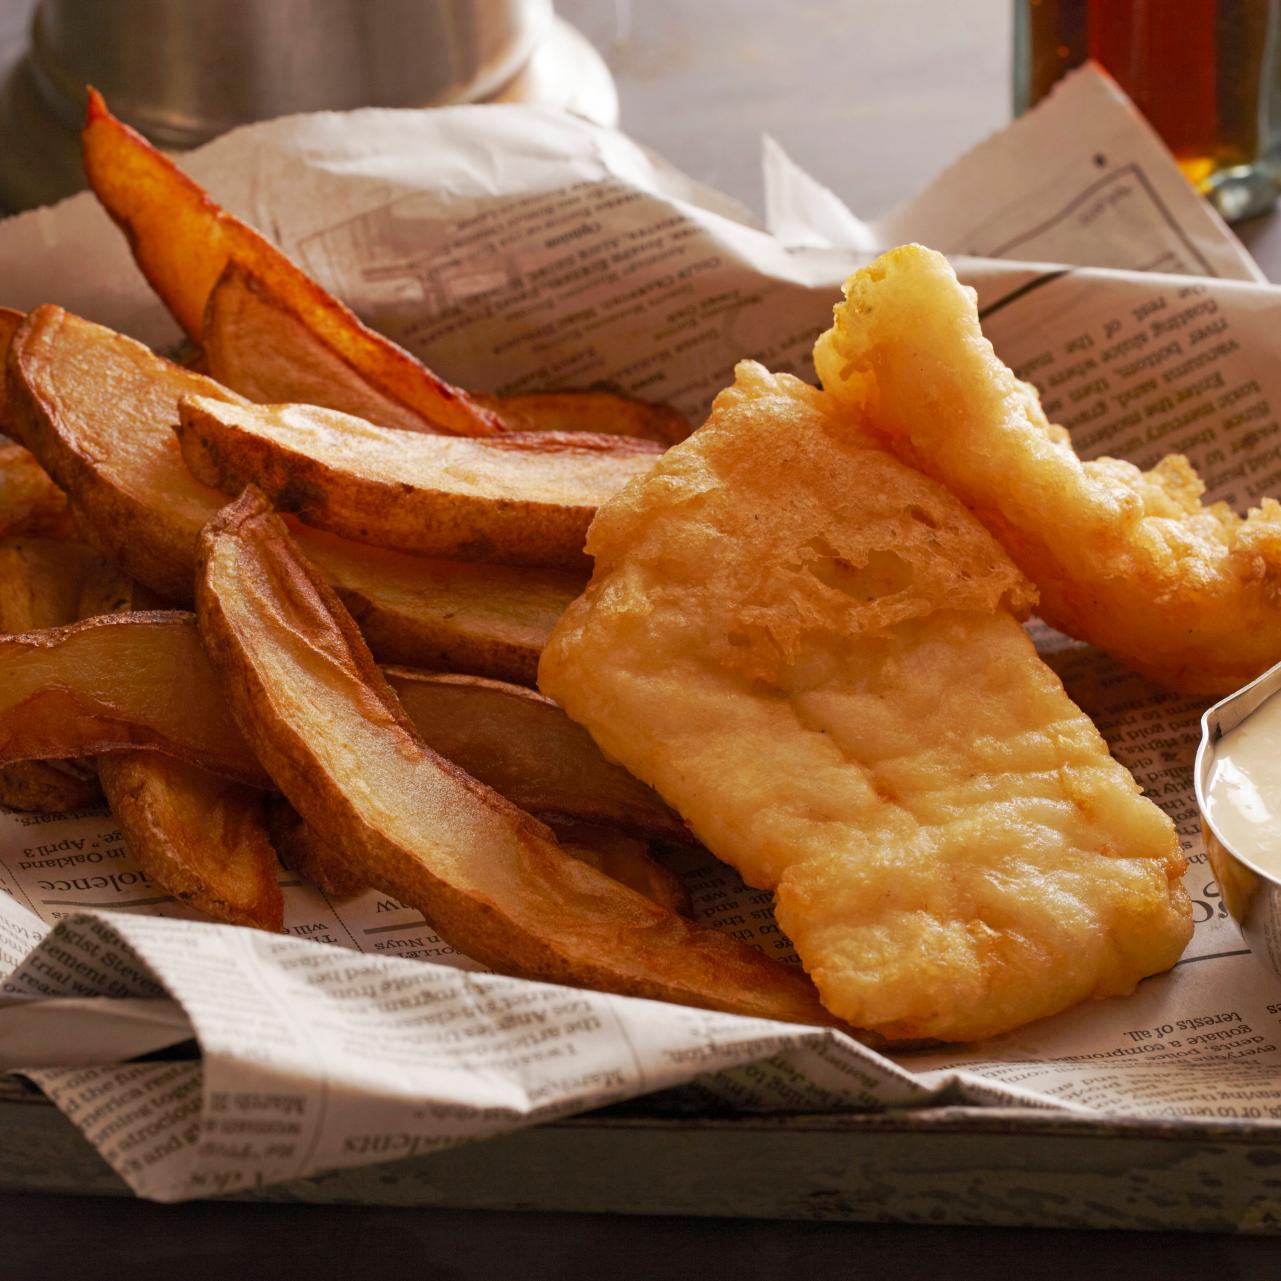 Awful awful, stale fish and chips tasted like it was double fried